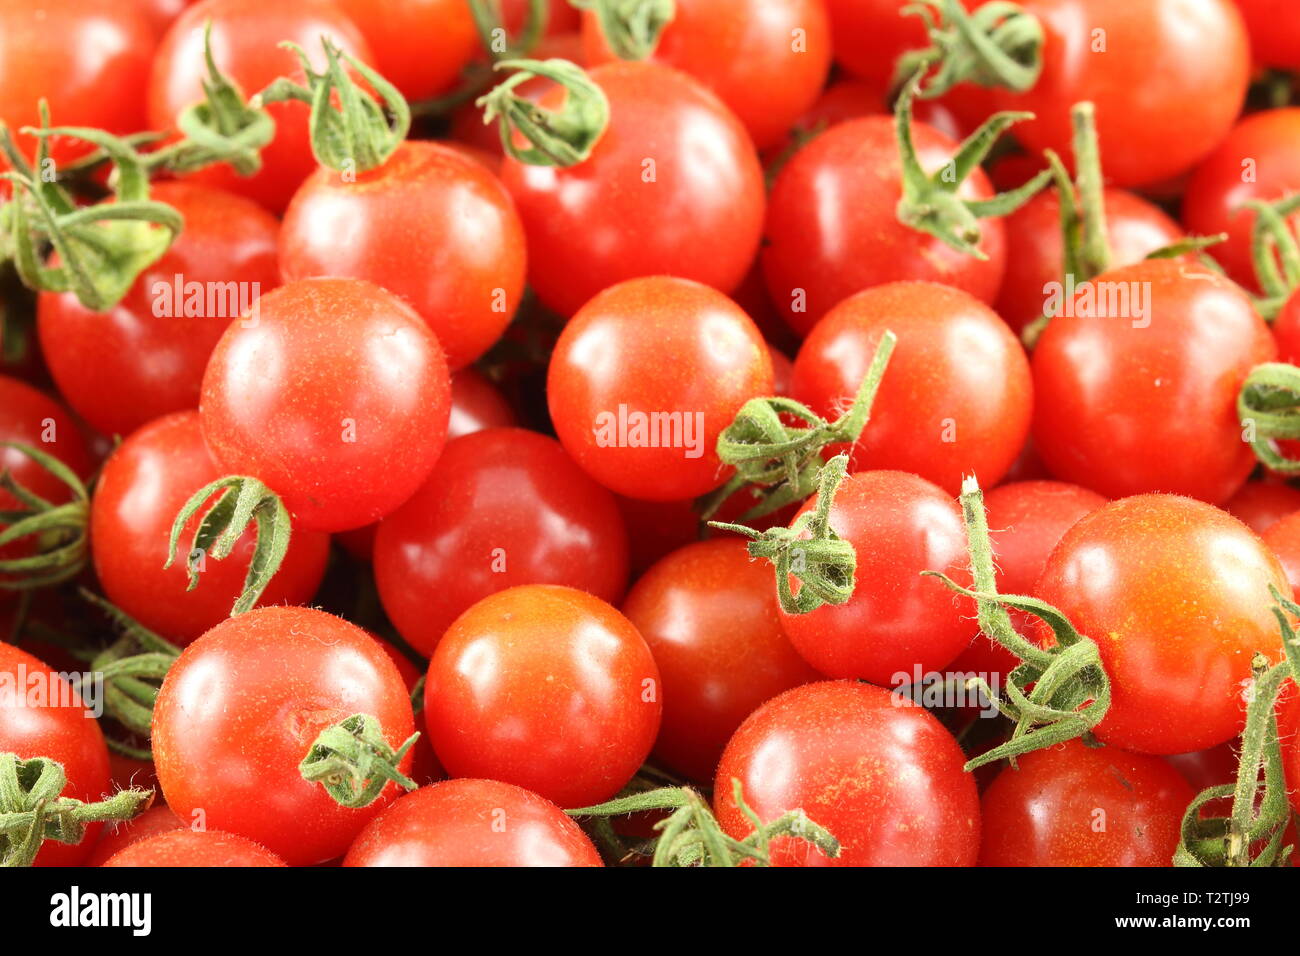 fresh wild currant tomatoes in closeup view Stock Photo